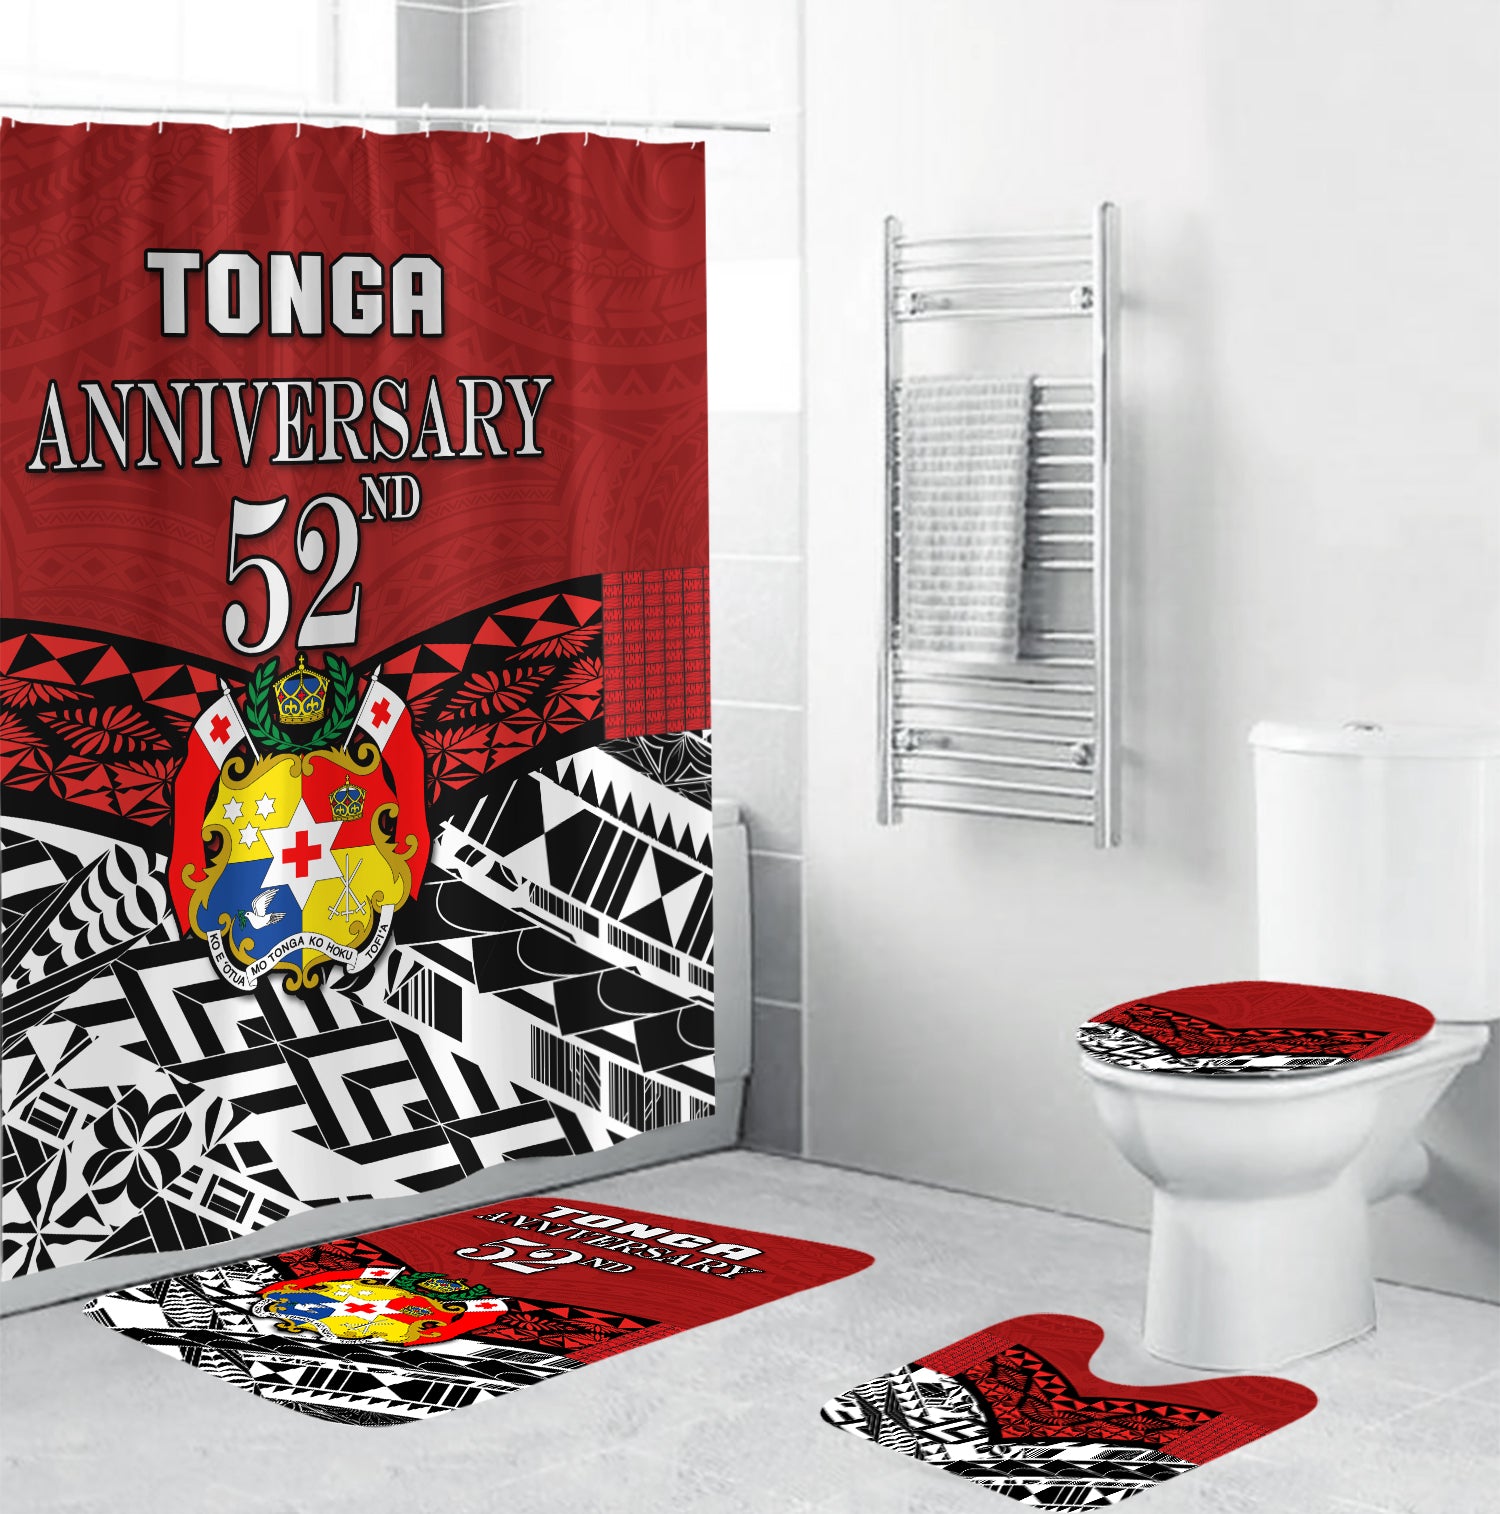 Tonga Bathroom Set Independence Anniversary Special Version 2022 LT14 Red - Polynesian Pride